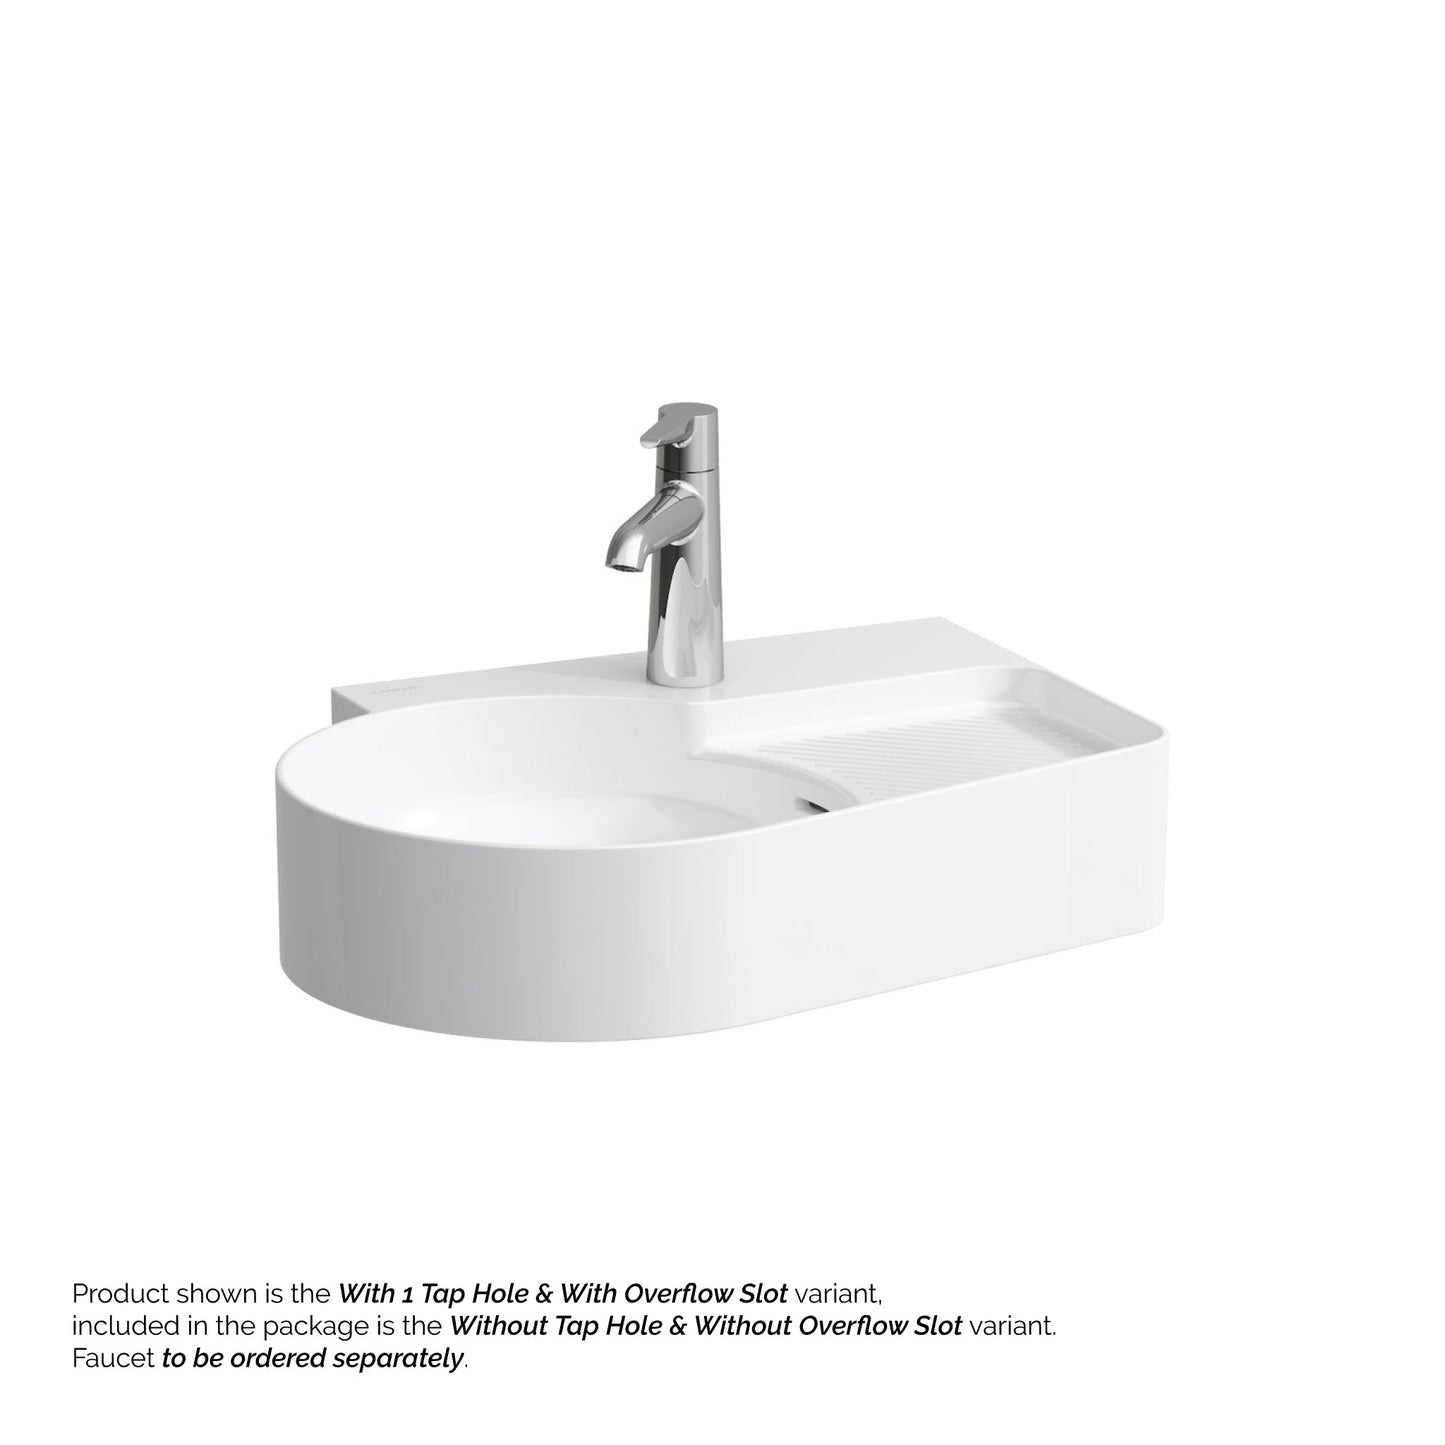 Laufen Val 21" x 16" Matte White Countertop Bathroom Sink Without Faucet Hole and Overflow Slot